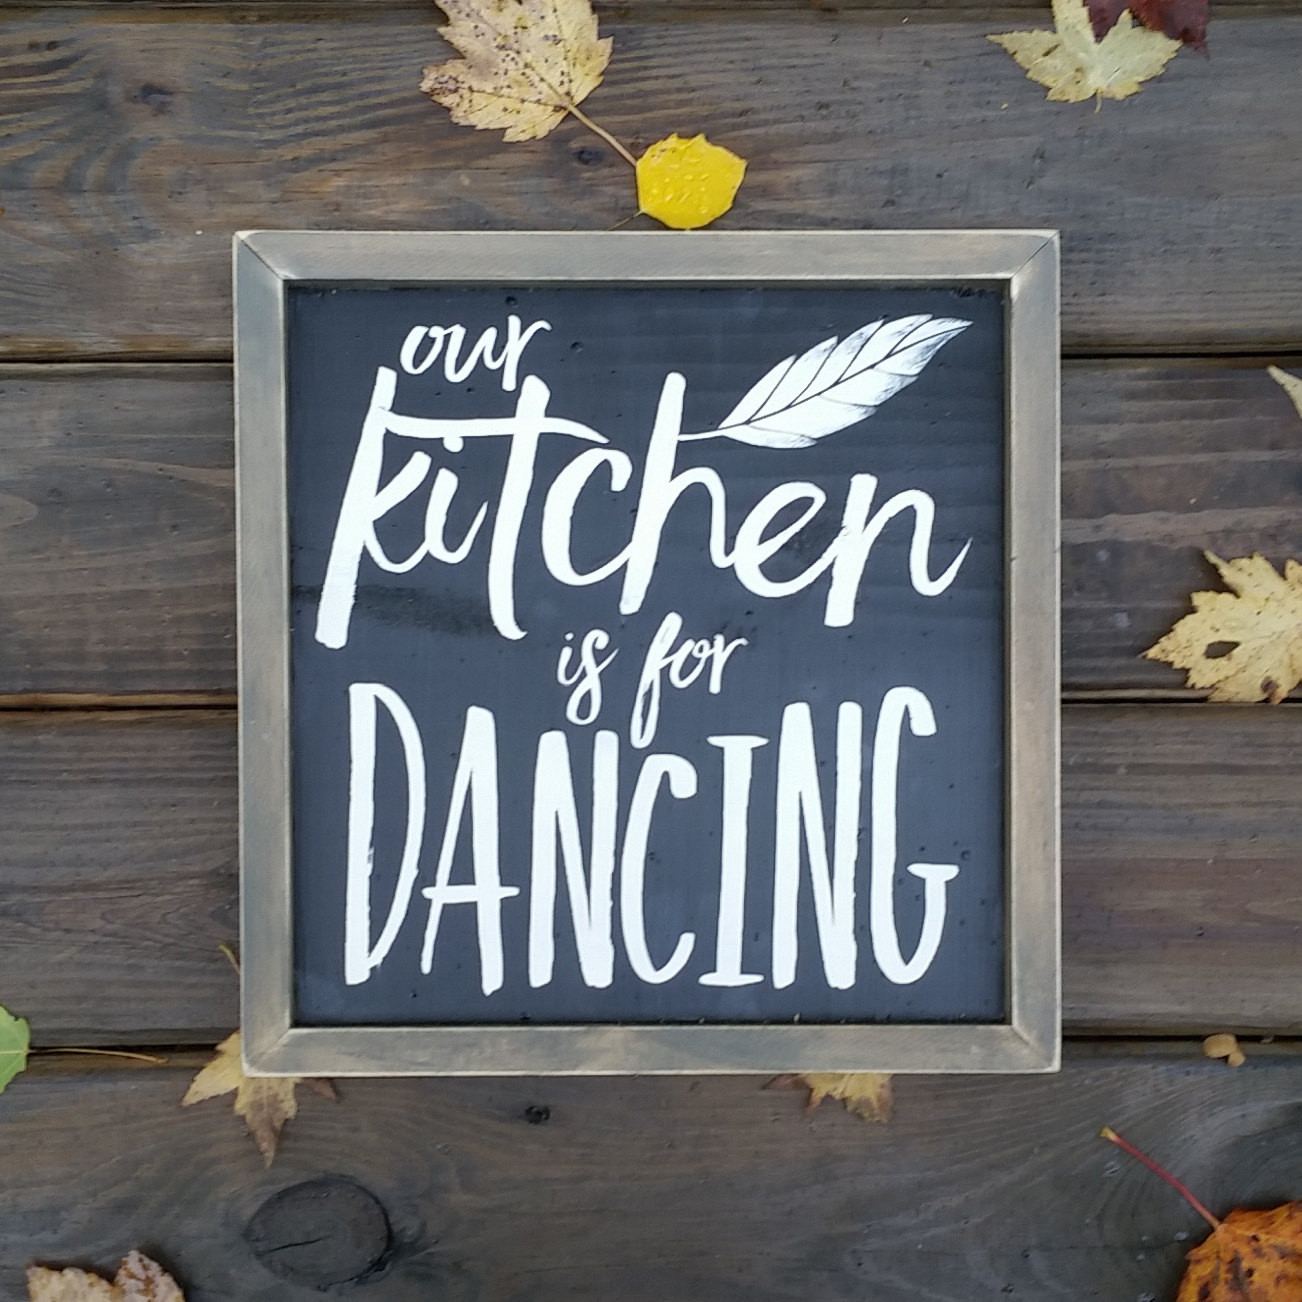 Rustic Kitchen Signs
 Our kitchen is for dancing Rustic wood sign Kitchen Décor